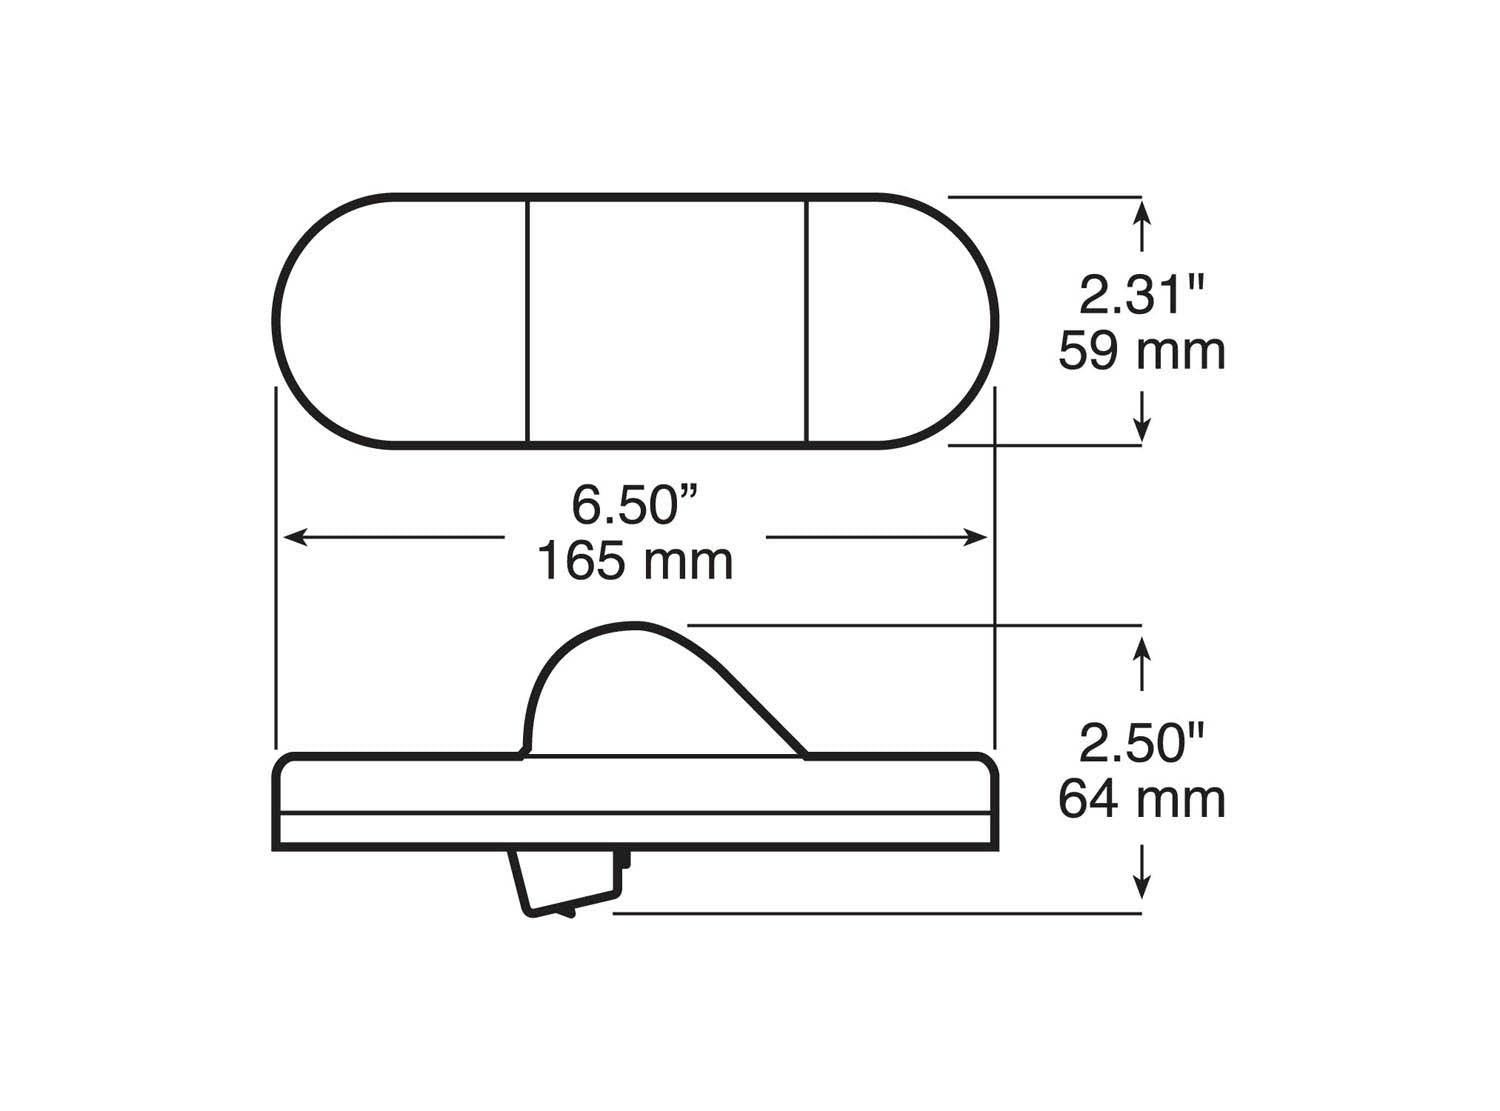 LED Mid-Turn/ Side Marker, Oval, 6.5"X2.25", amber (Pack of 6) - 355_line_dual_2view-BX5-1_0059ccd8-7368-4fc7-b290-1ce1a5844f1e